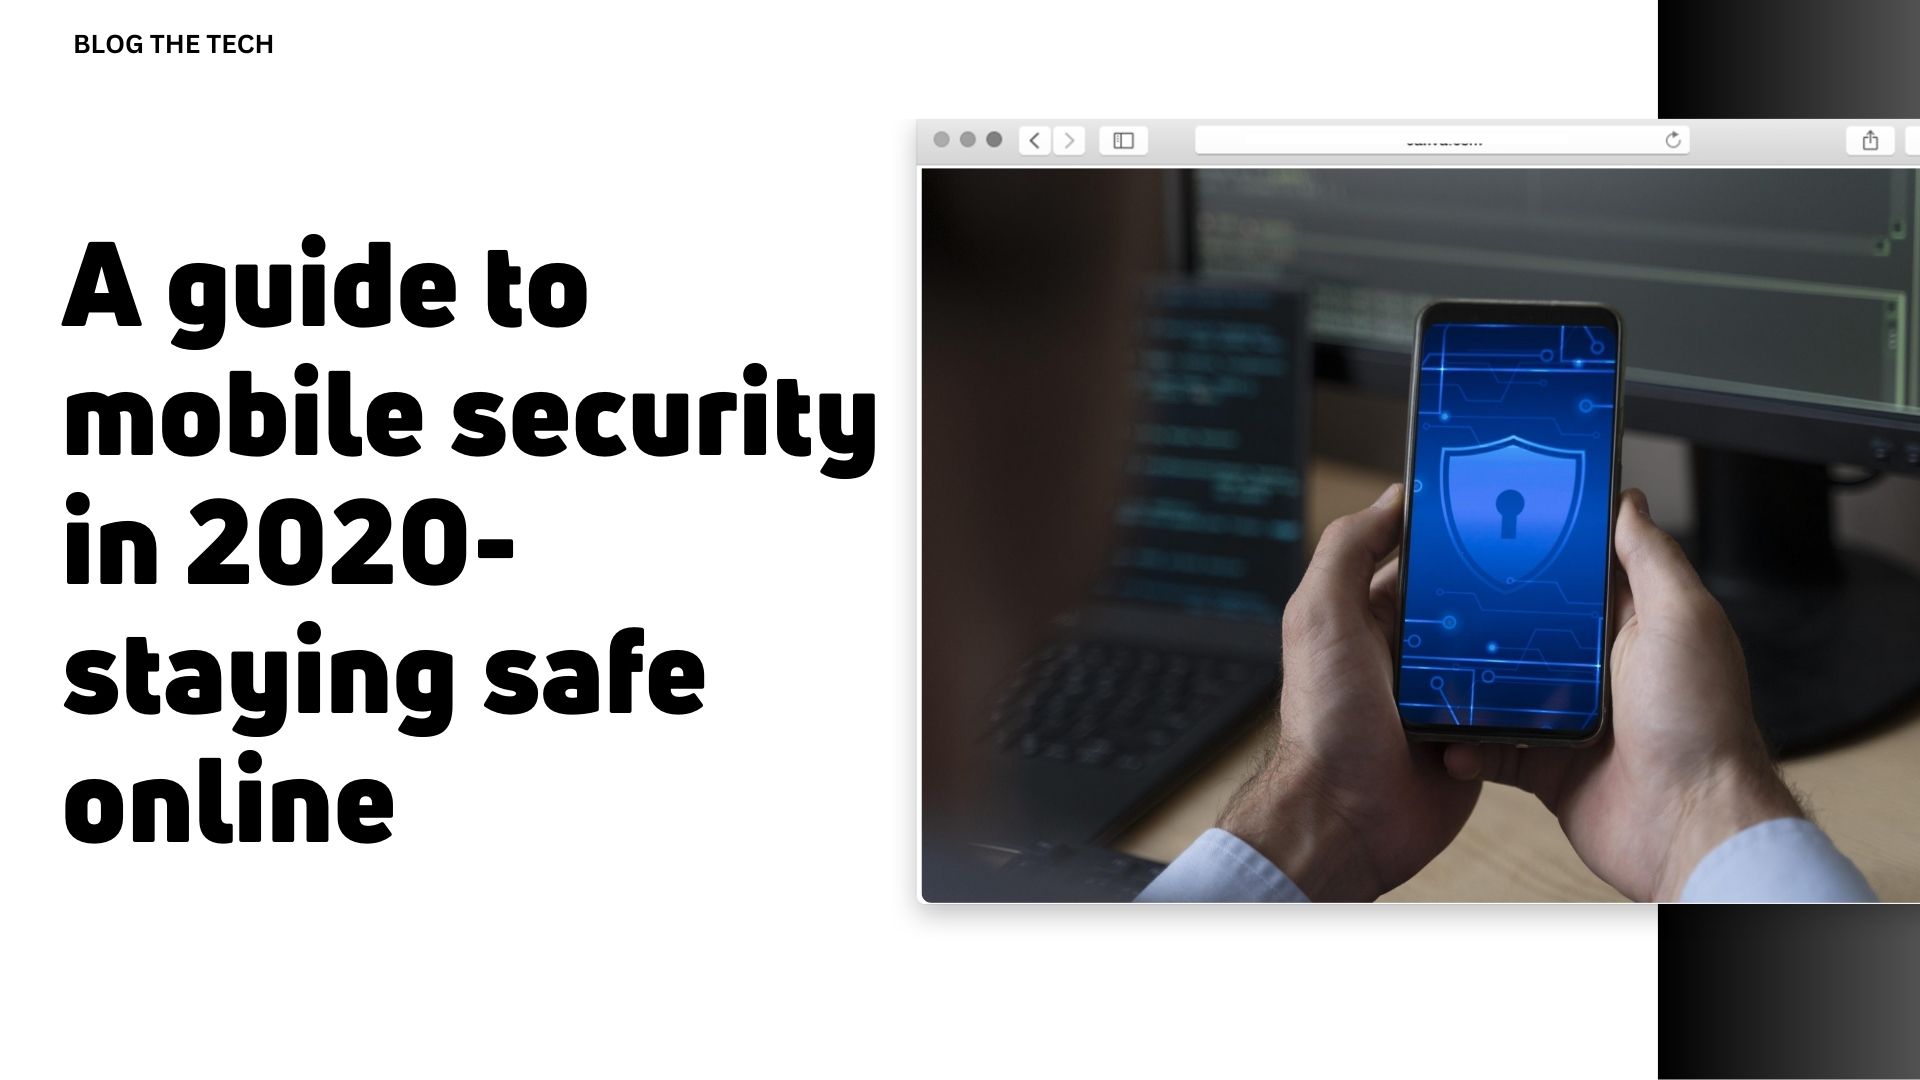 A guide to mobile security in 2020 staying safe online